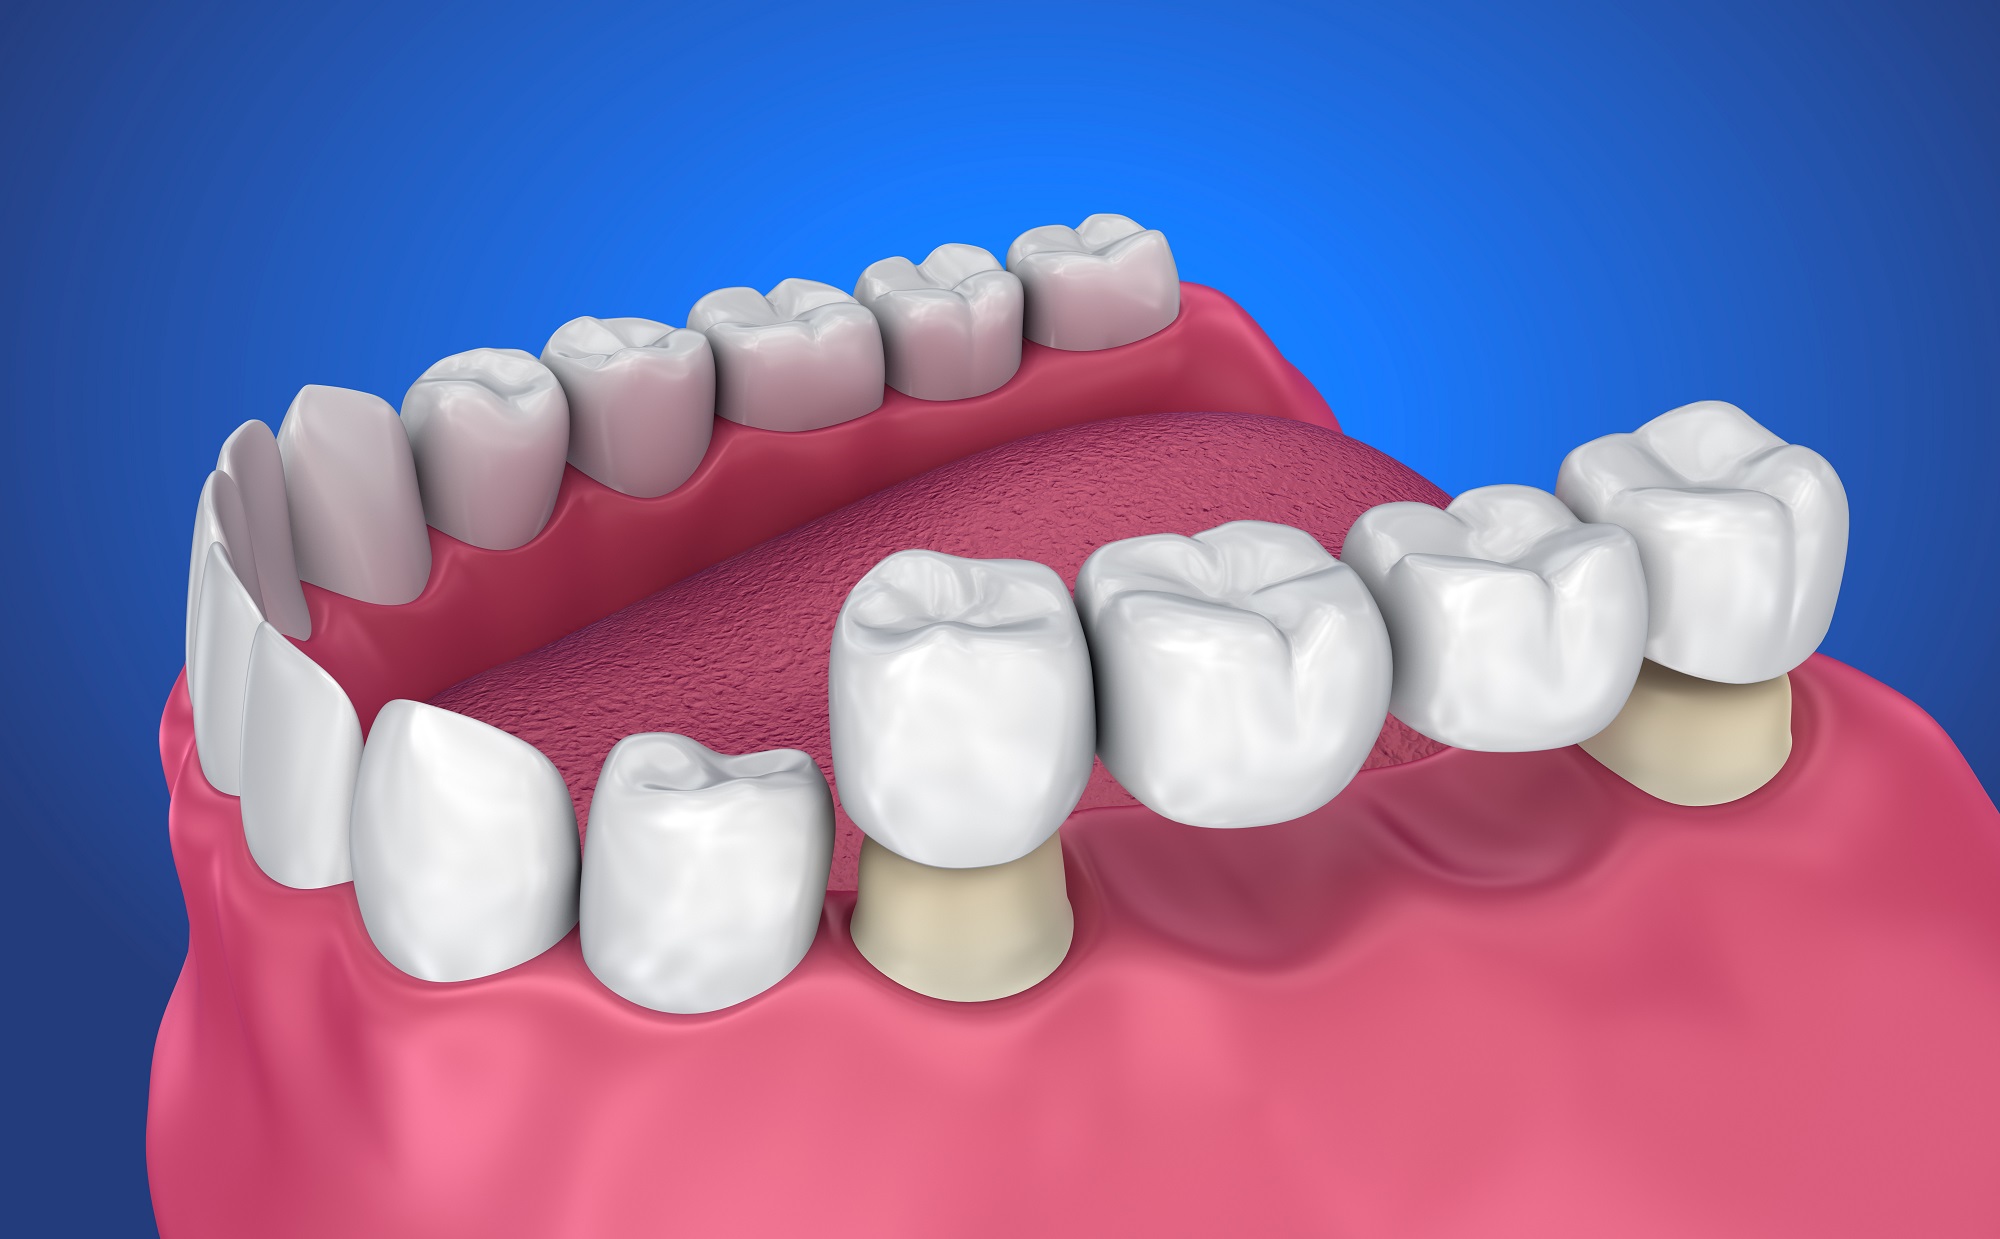 Fixed Dental Bridge | Houston Tooth Replacement Options